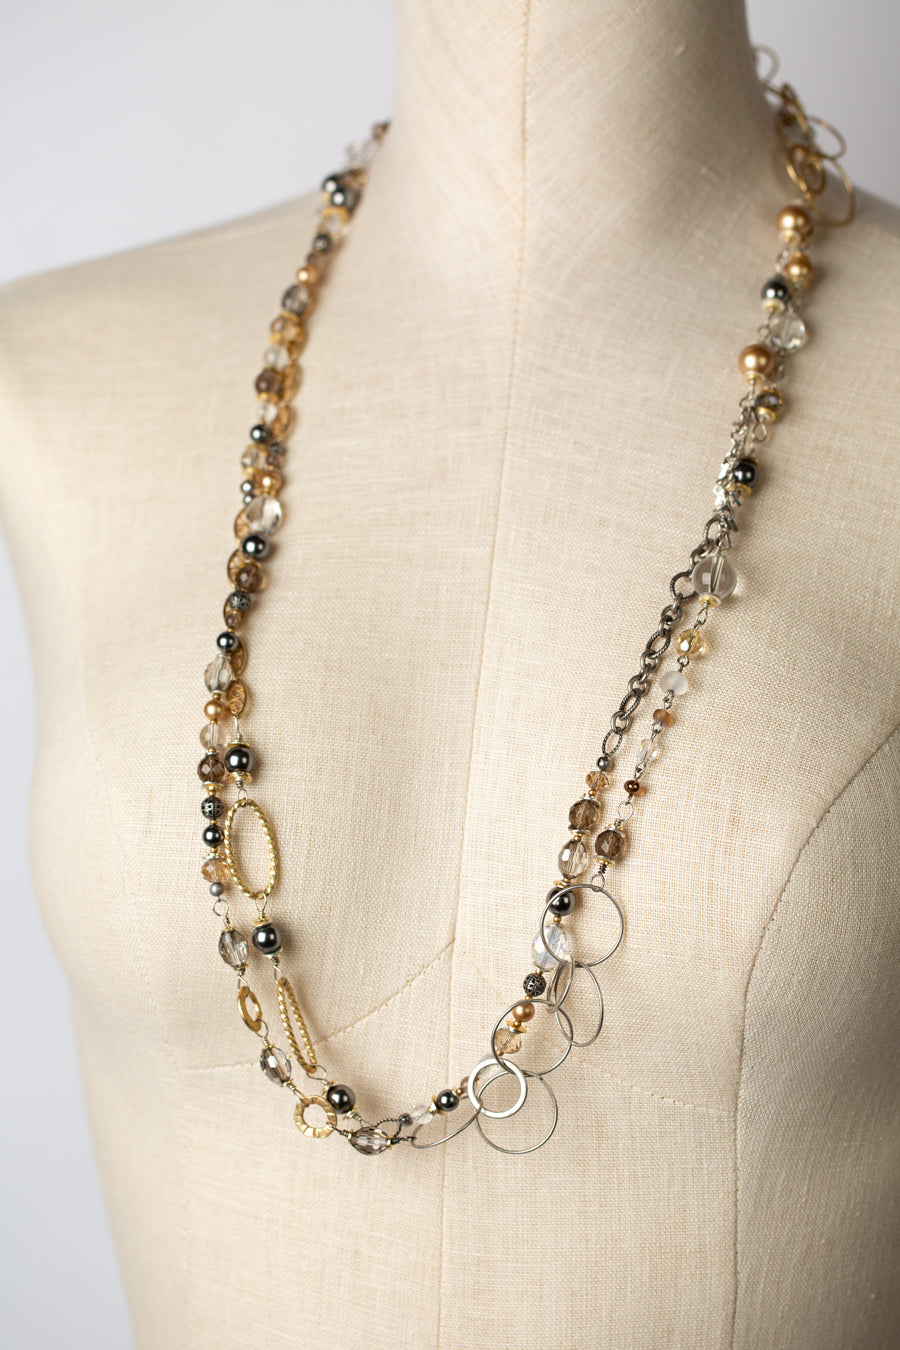 Silver & Gold 65-68" Pearl, Smoky Quartz Simple Necklace (limited)